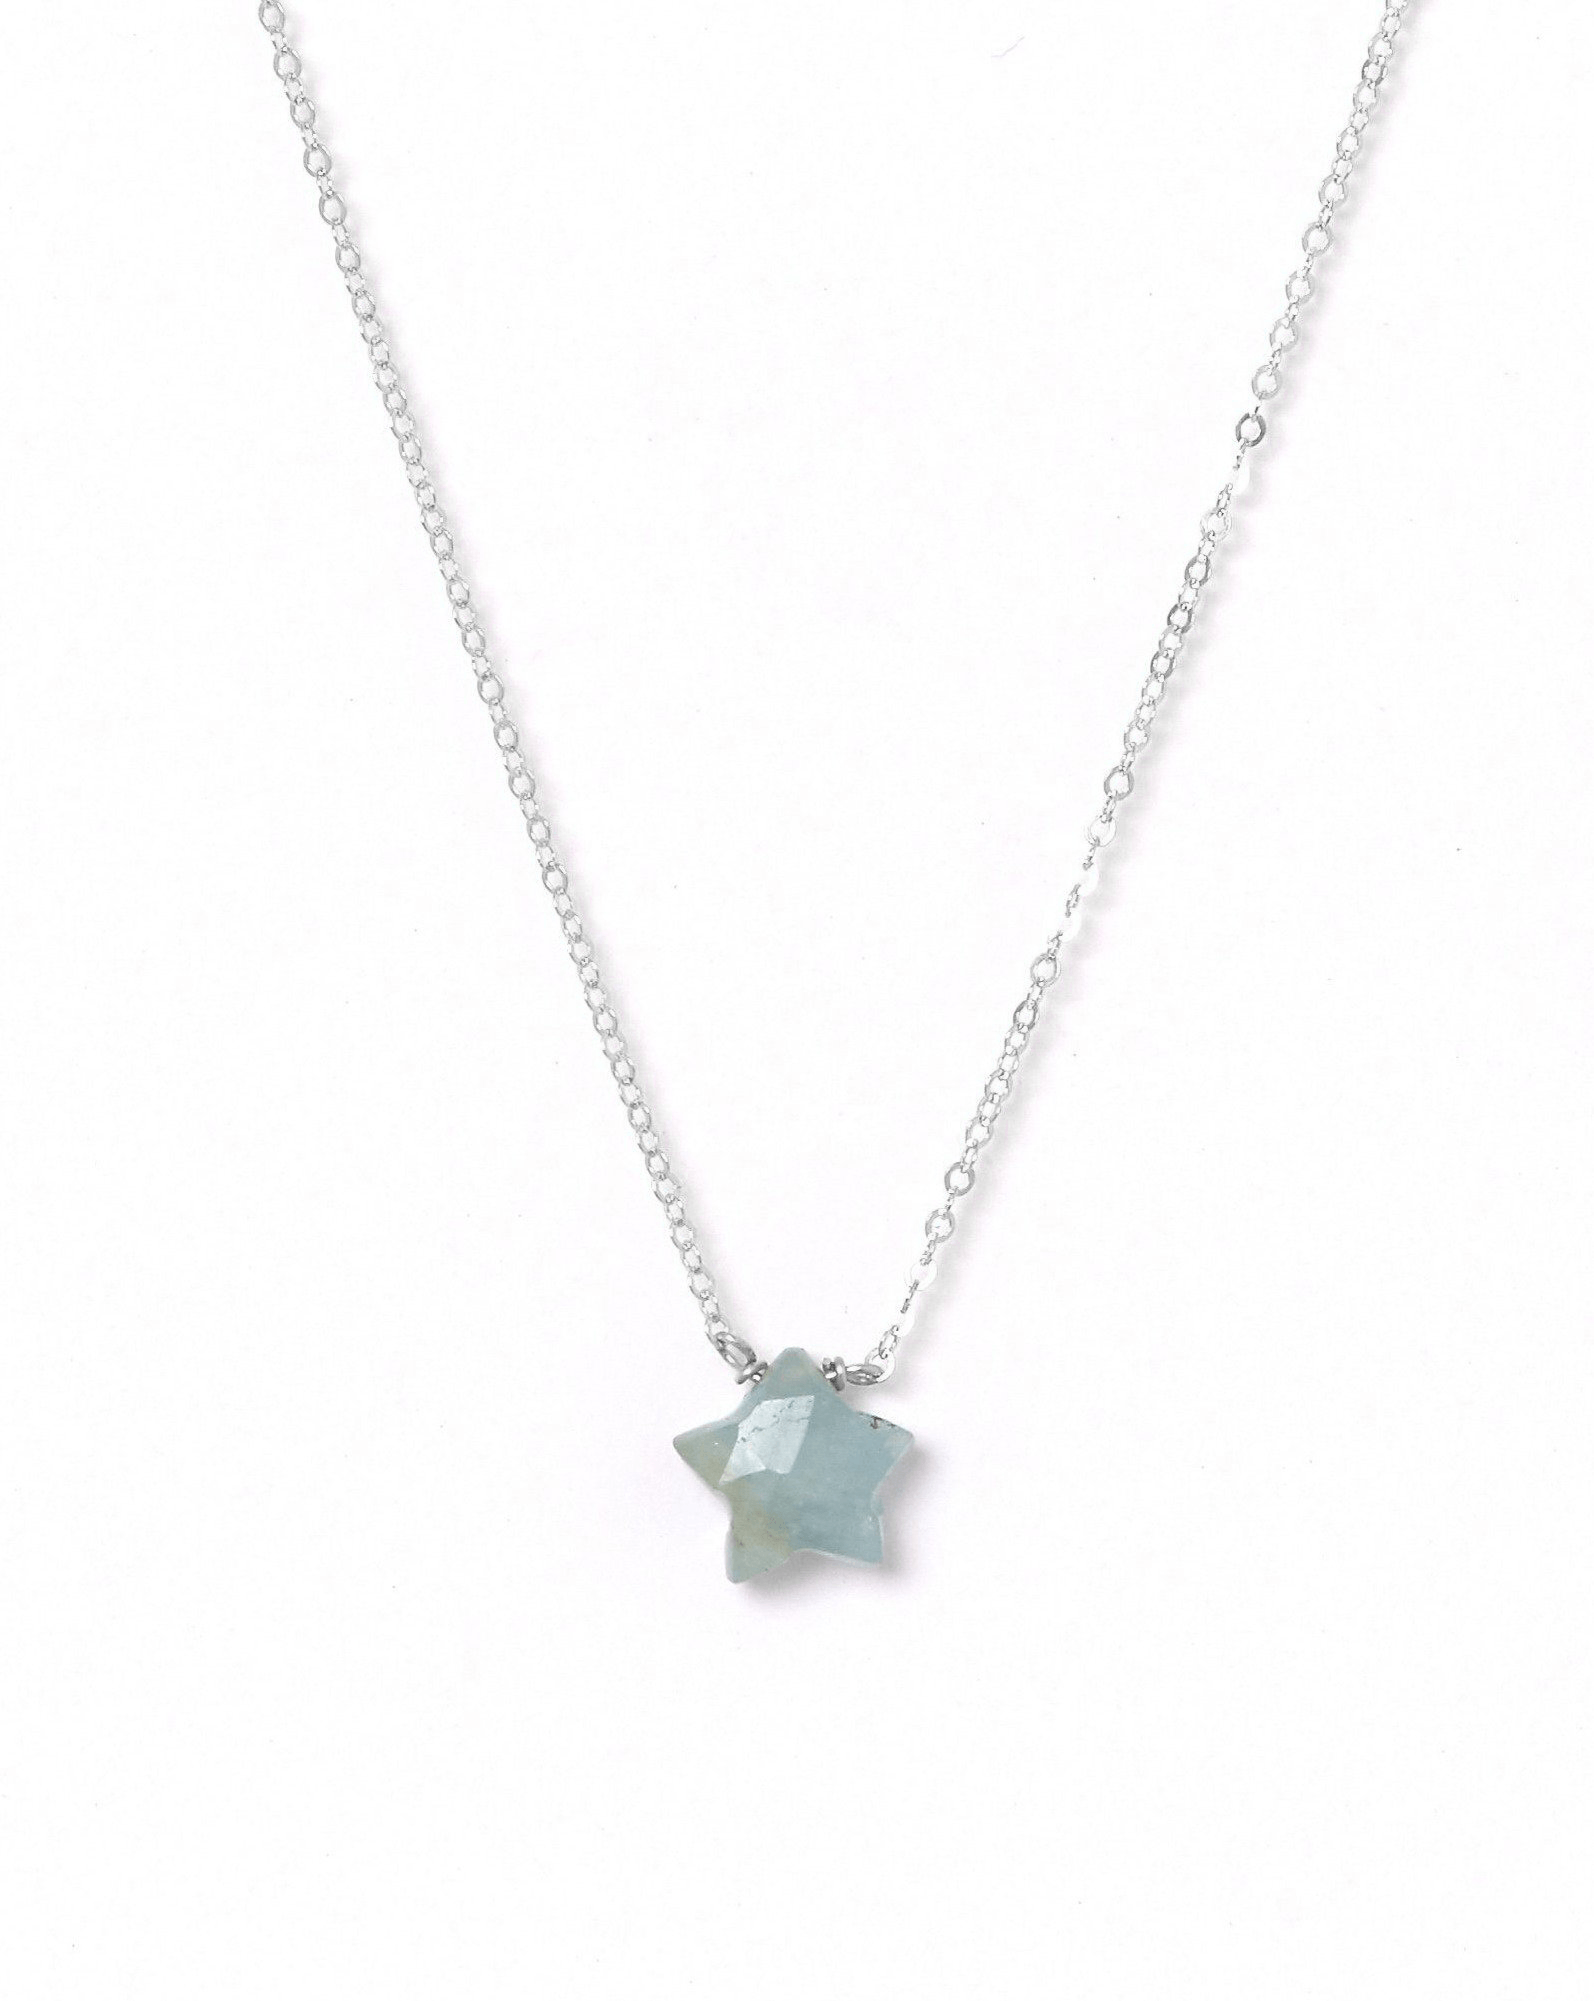 Star Necklace by KOZAKH. A 16 to 18 inch adjustable length necklace, crafted in Sterling Silver, featuring an Amazonite star charm.